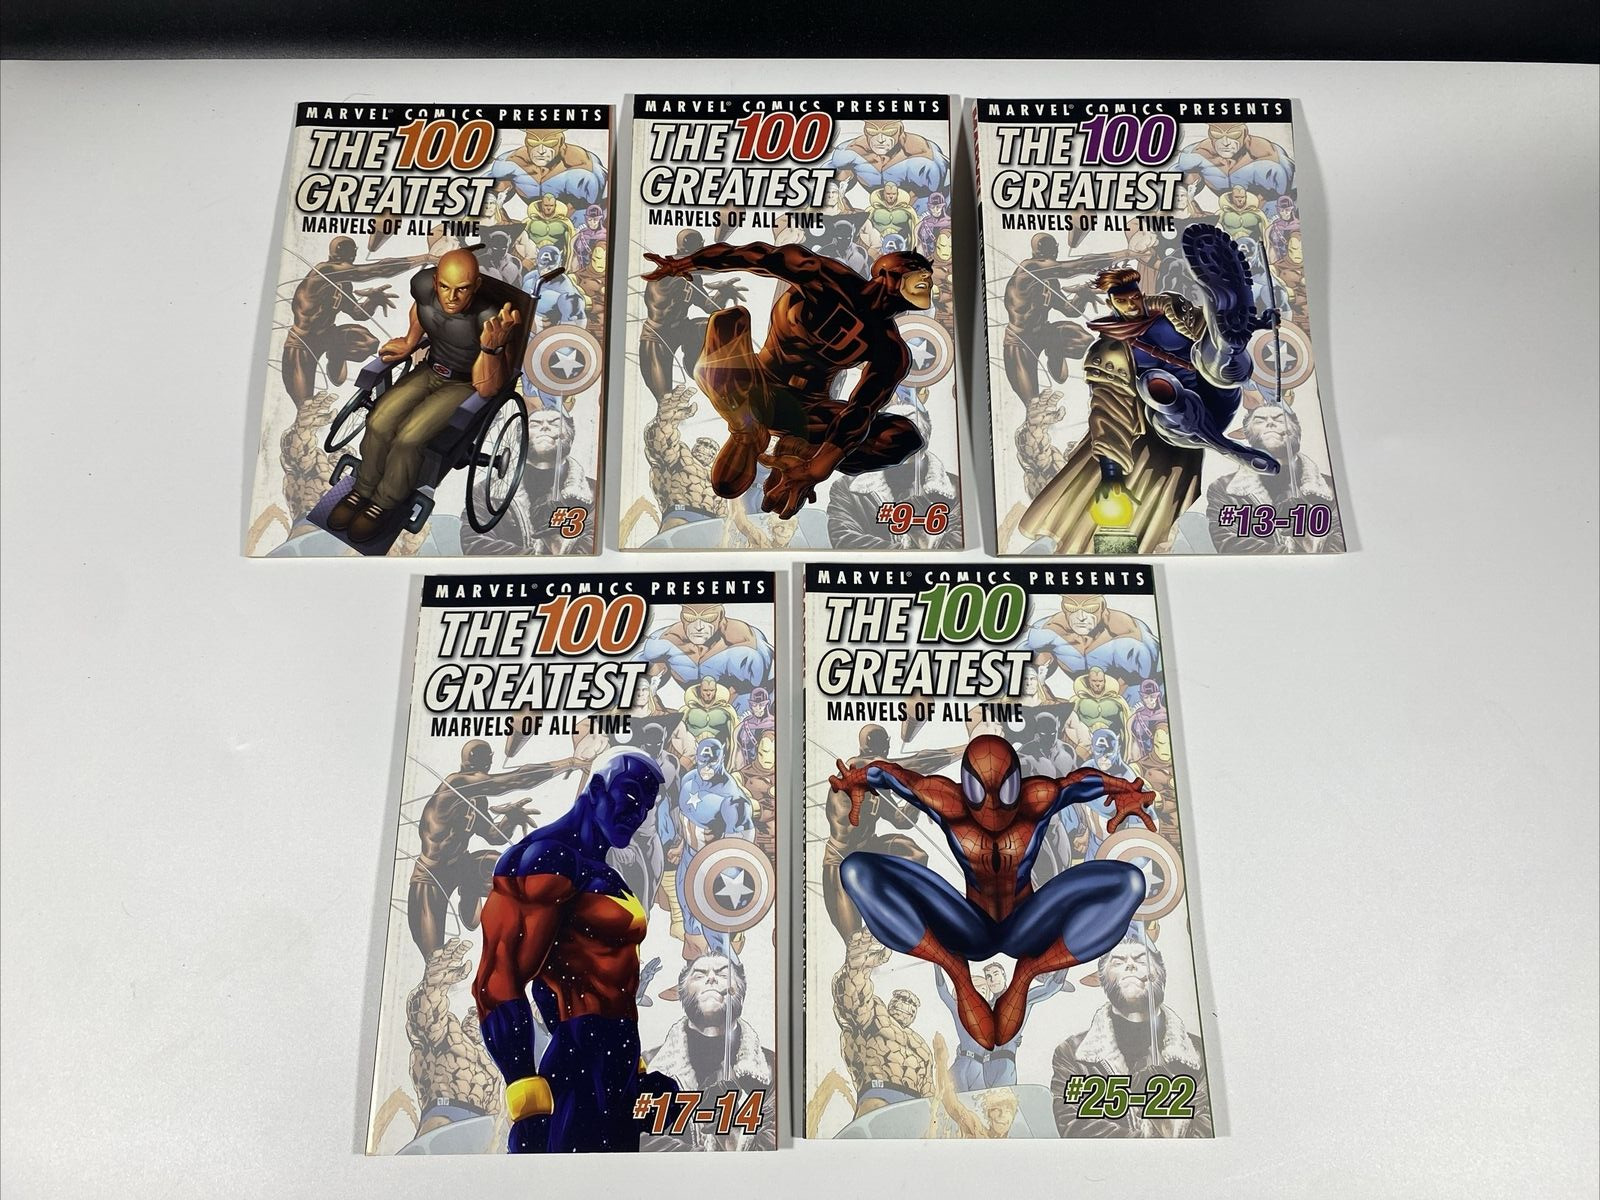 Marvel Comics Presents The 100 Greatest Marvels of All Time - Lot